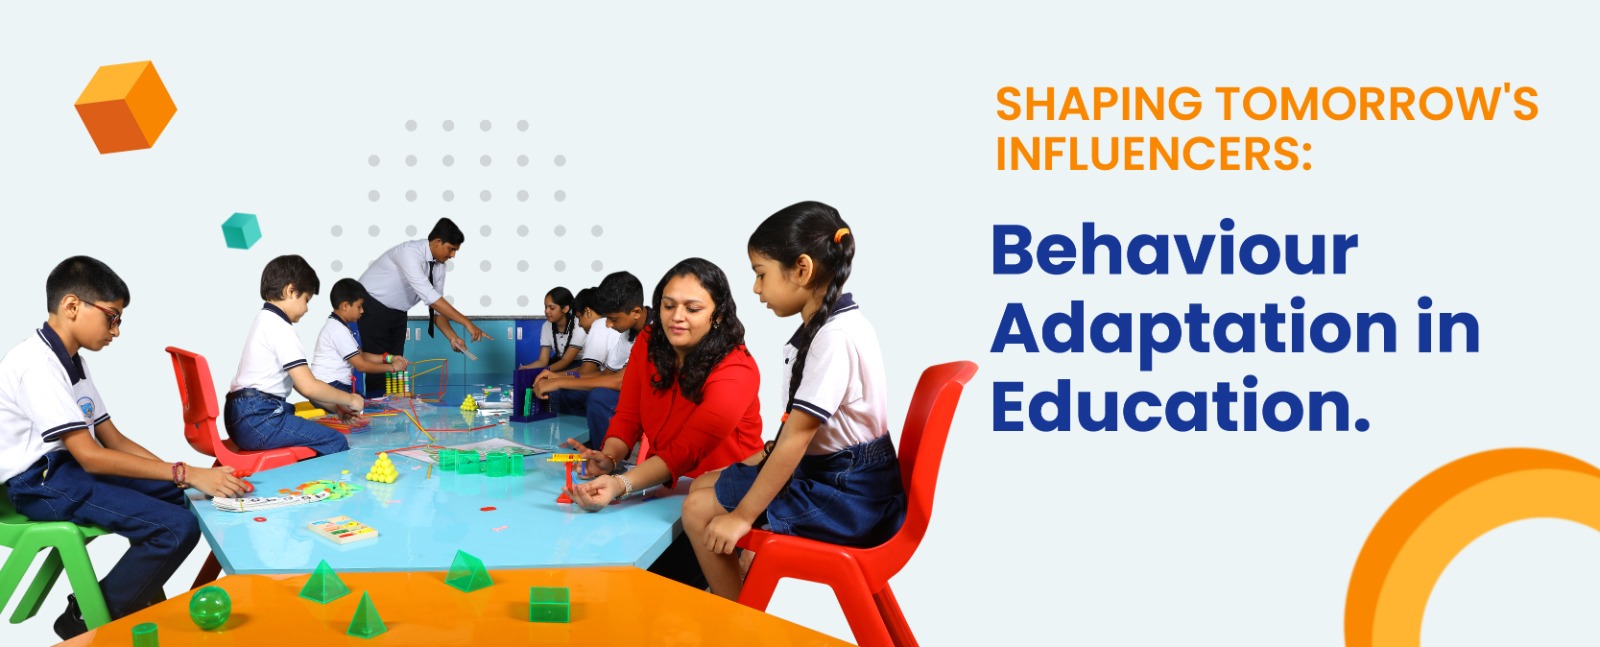 Shaping Tomorrow’s Influencers: Behaviour Adaptation in Education